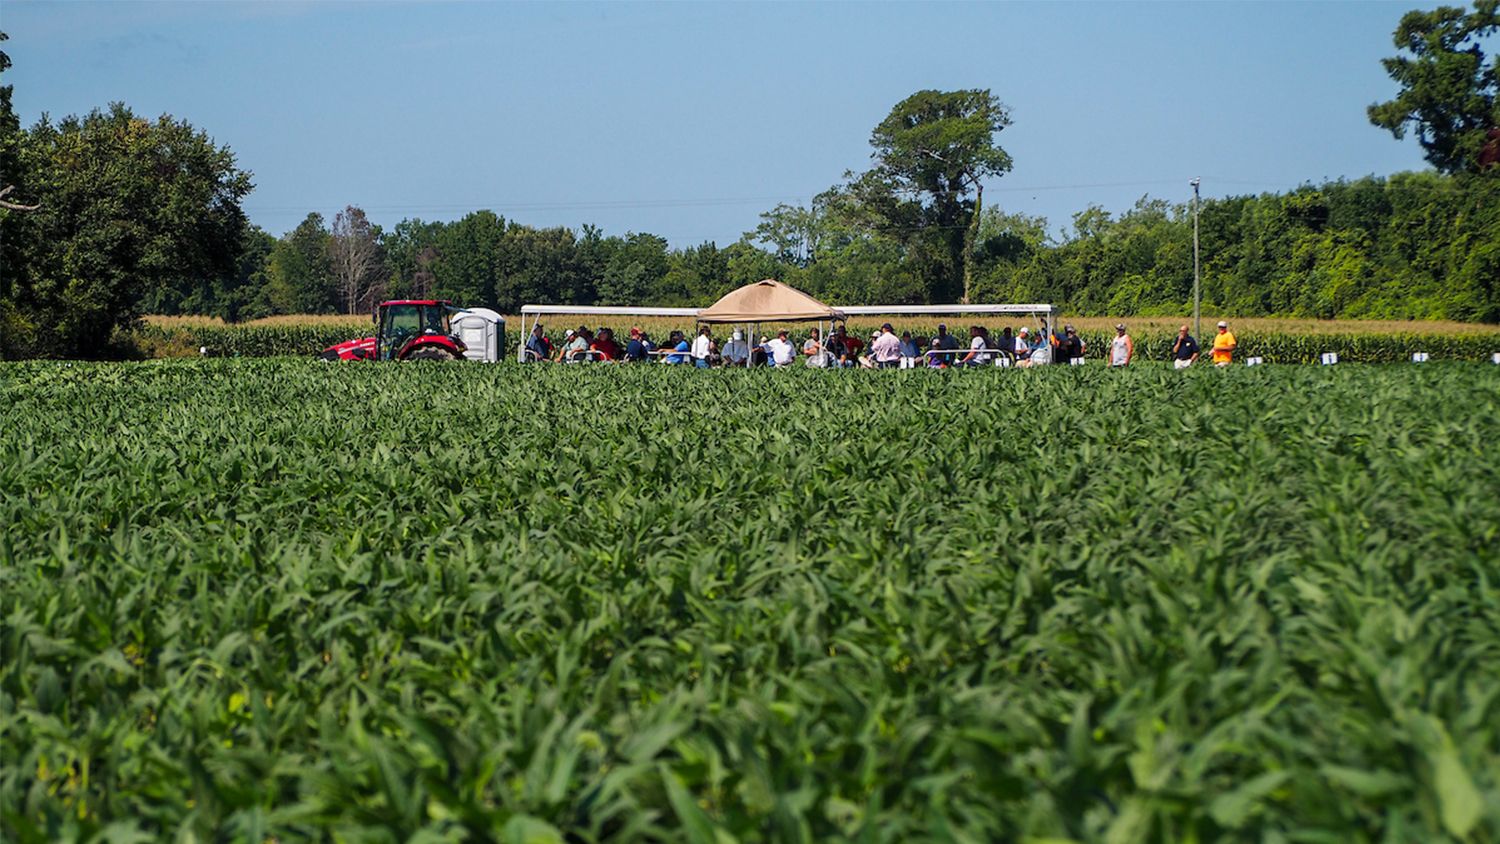 distant view of a crowd in a corn field